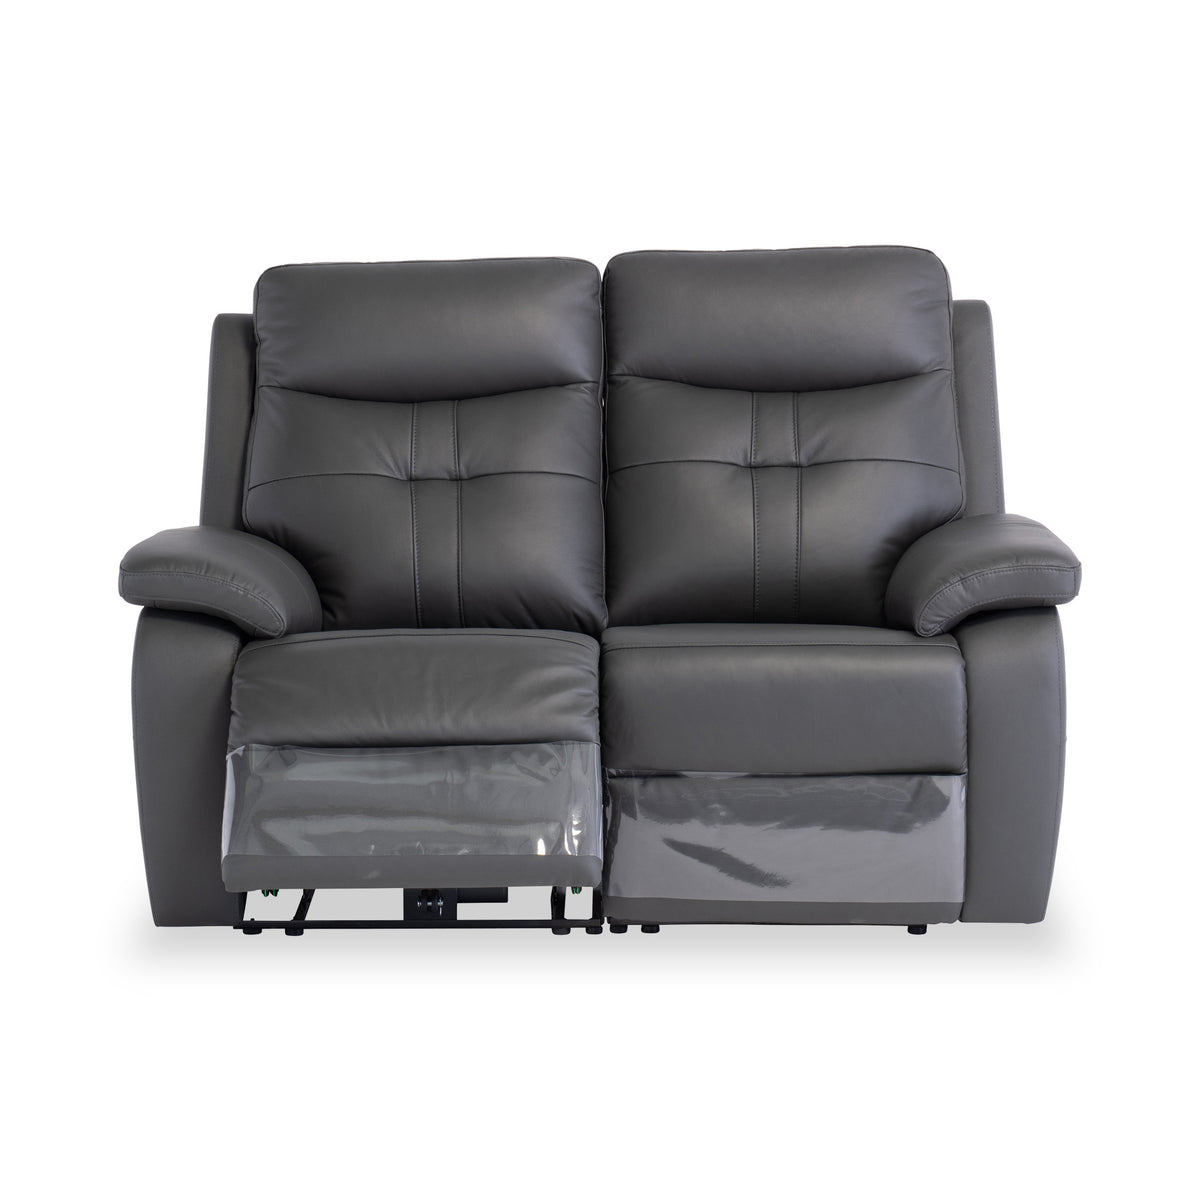 Talbot Charcoal Leather Electric Reclining 2 Seater Sofa from Roseland Furniture